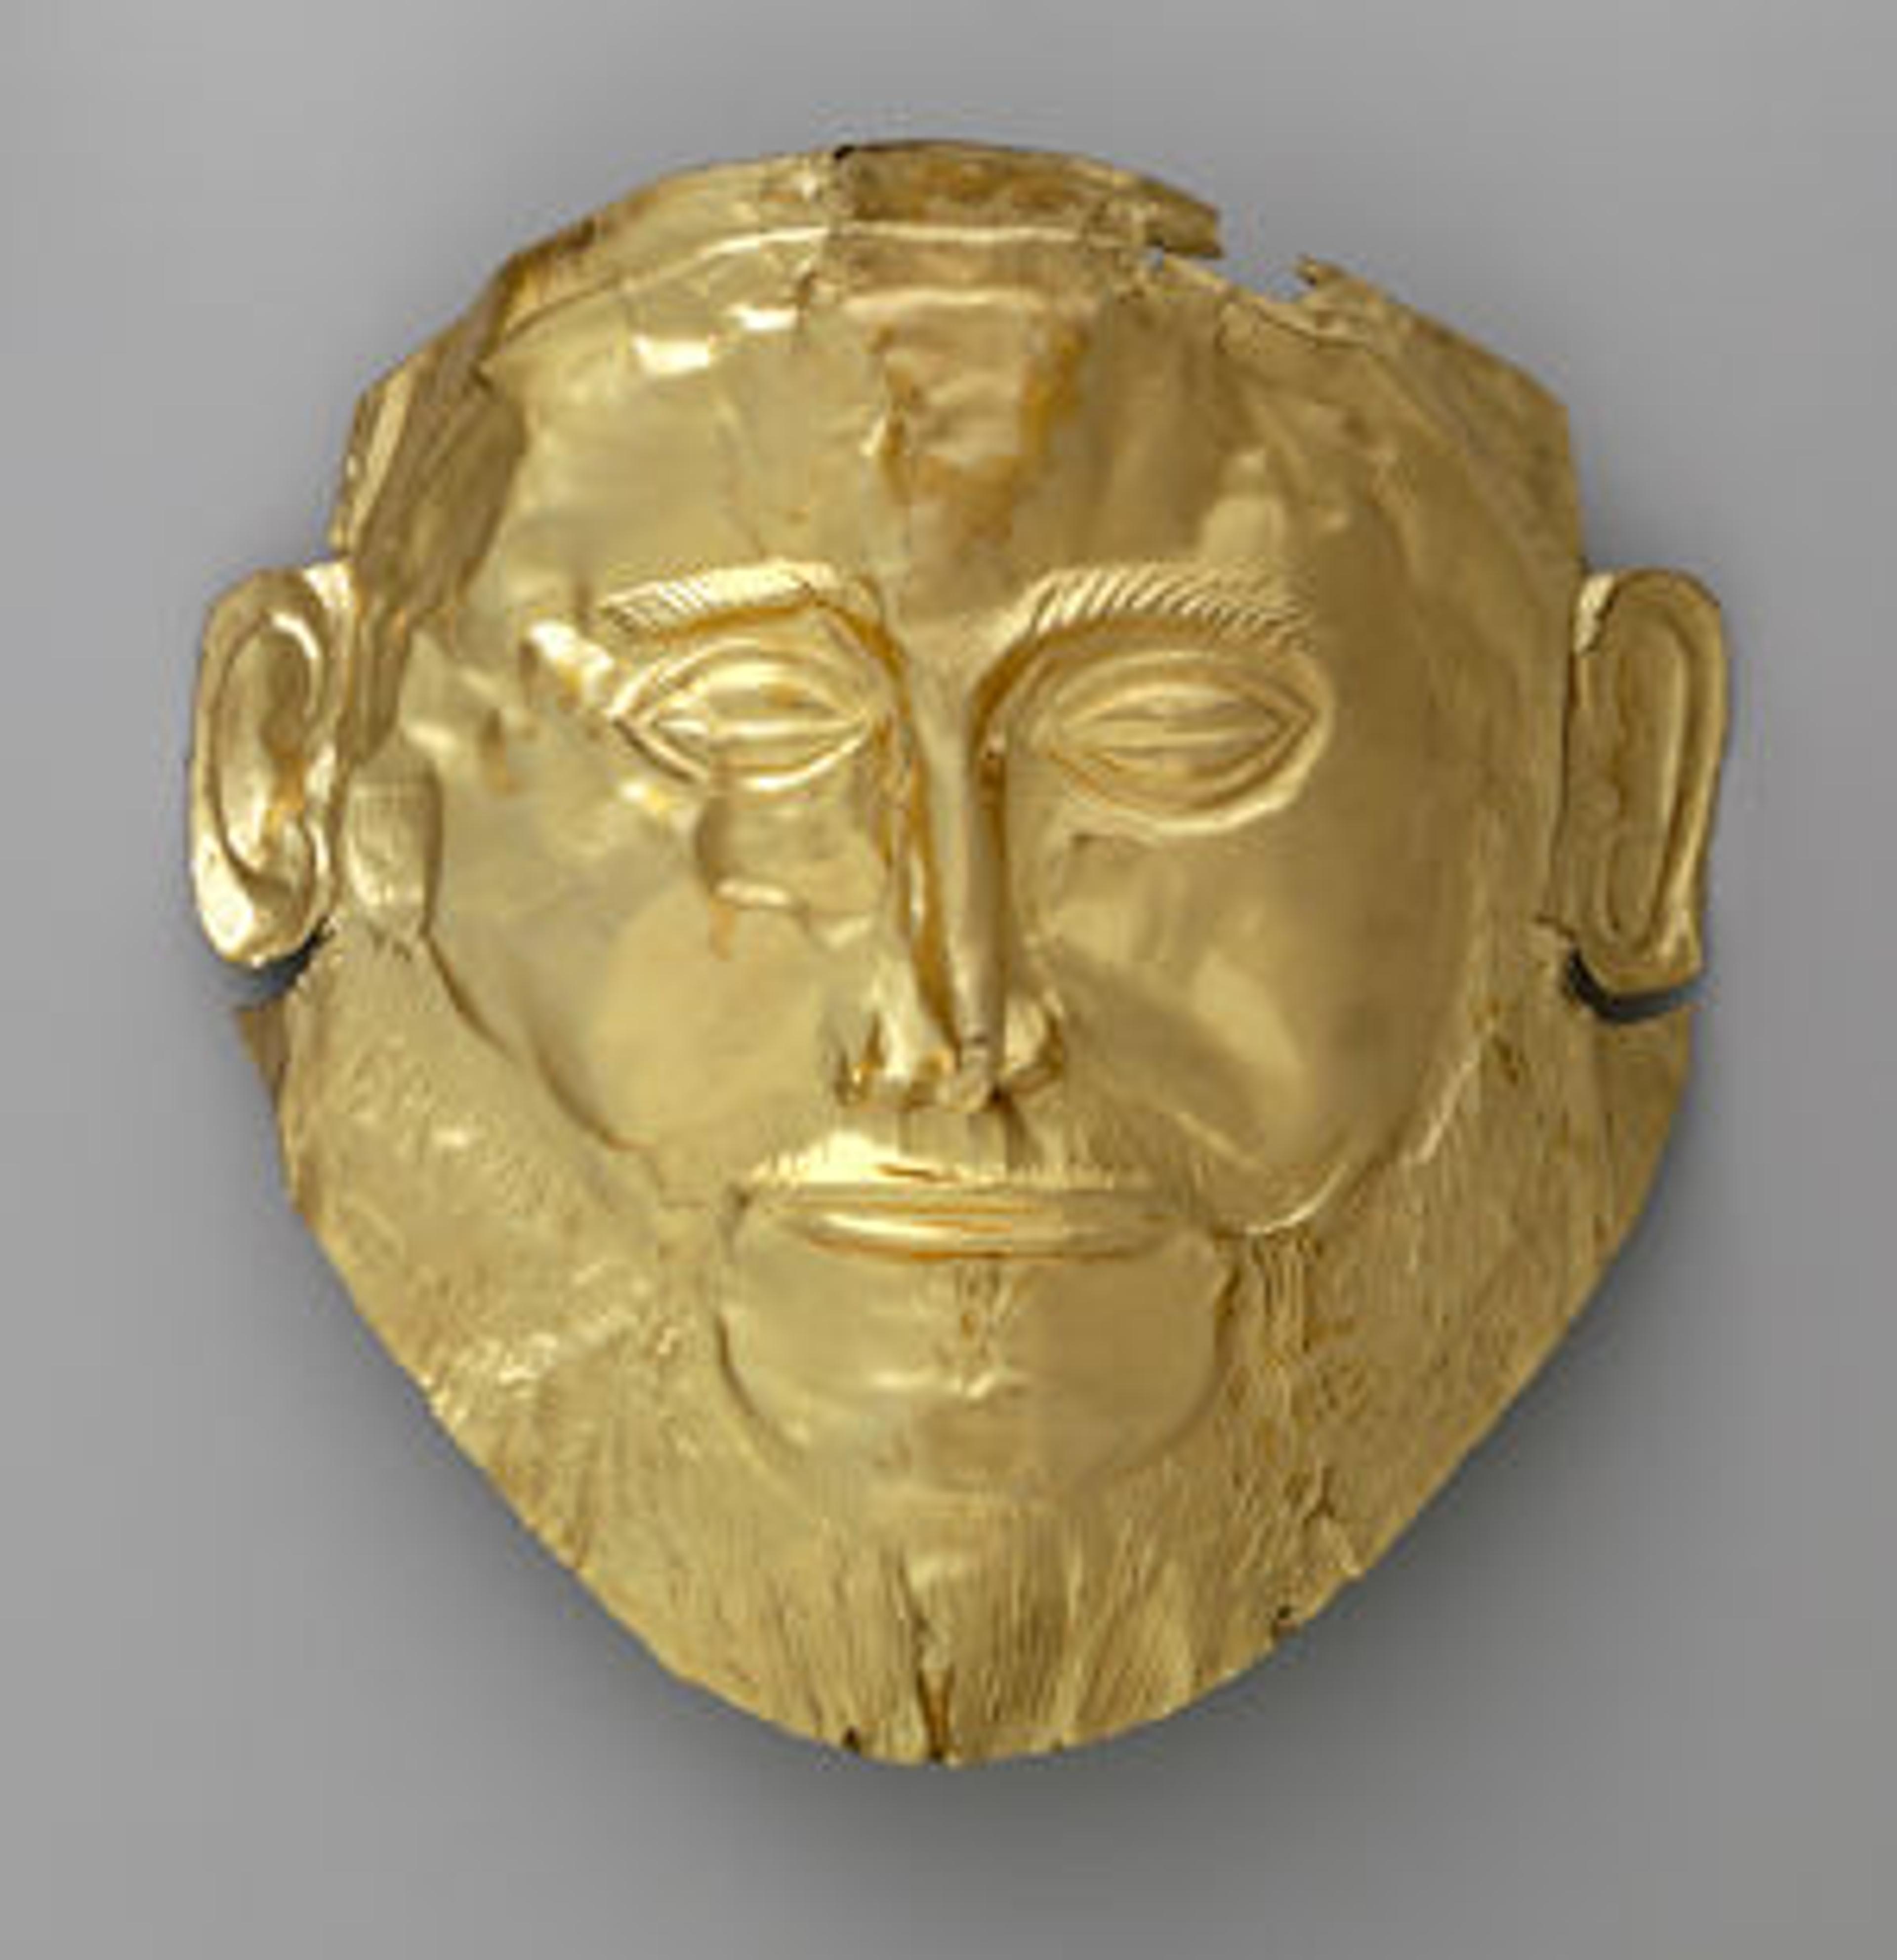 Emile Gilliéron père (Swiss, 1850–1924) | Electrotype reproduction of the gold "Mask of Agamemnon" from Mycenae, ca. 1906 | 06.224